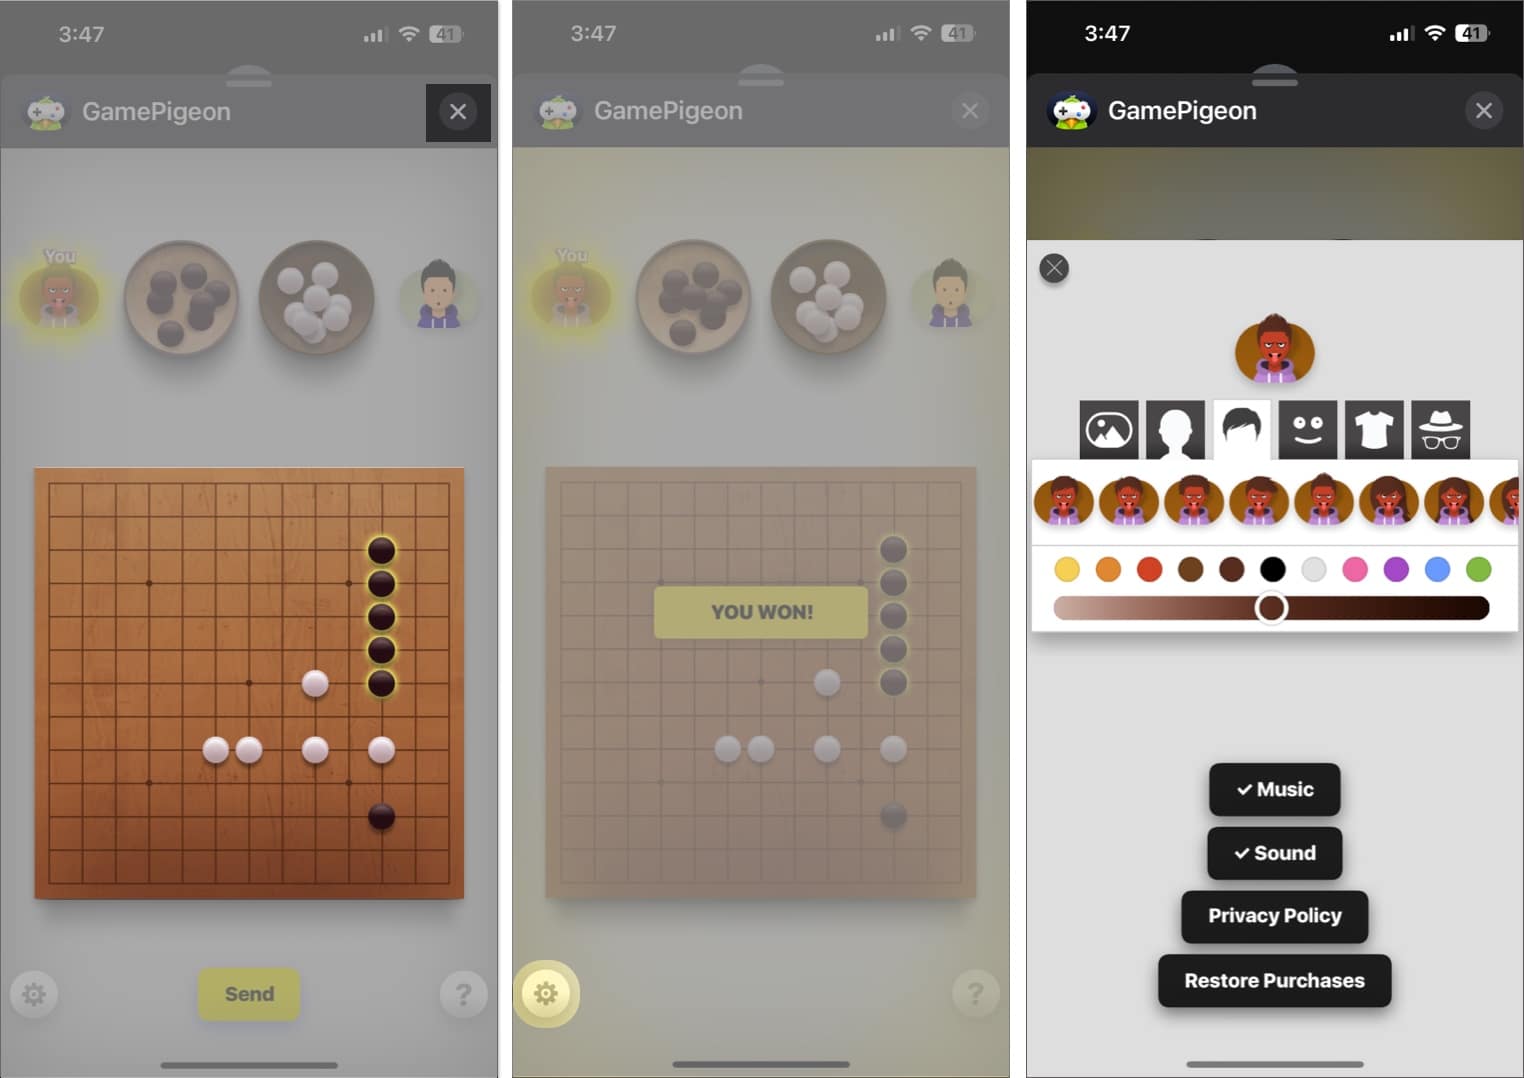 The winner interface, tap the settings icon to make changes, make changes like you desire in iMessage playing Gomoku